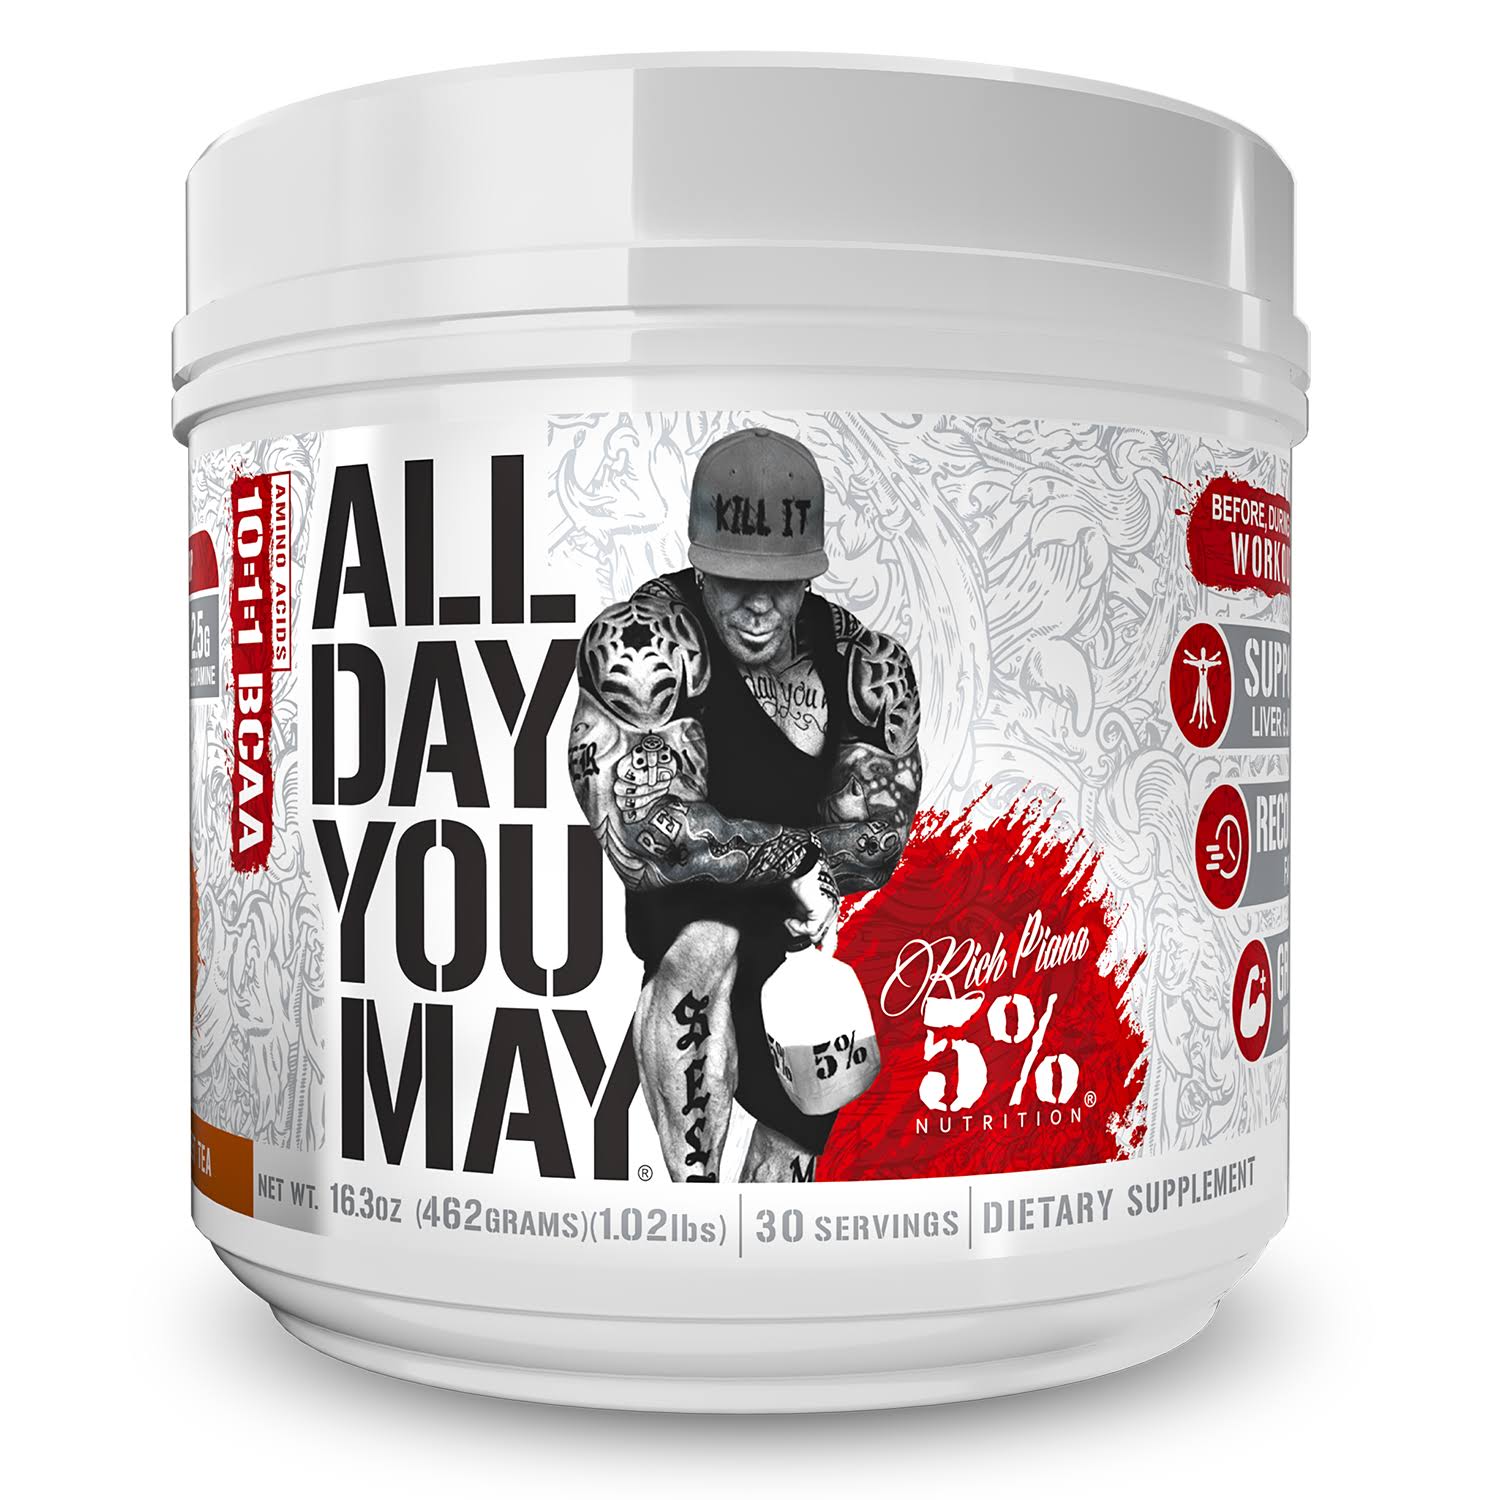 5% Nutrition All Day You May Southern Sweet Tea - 30 Servings